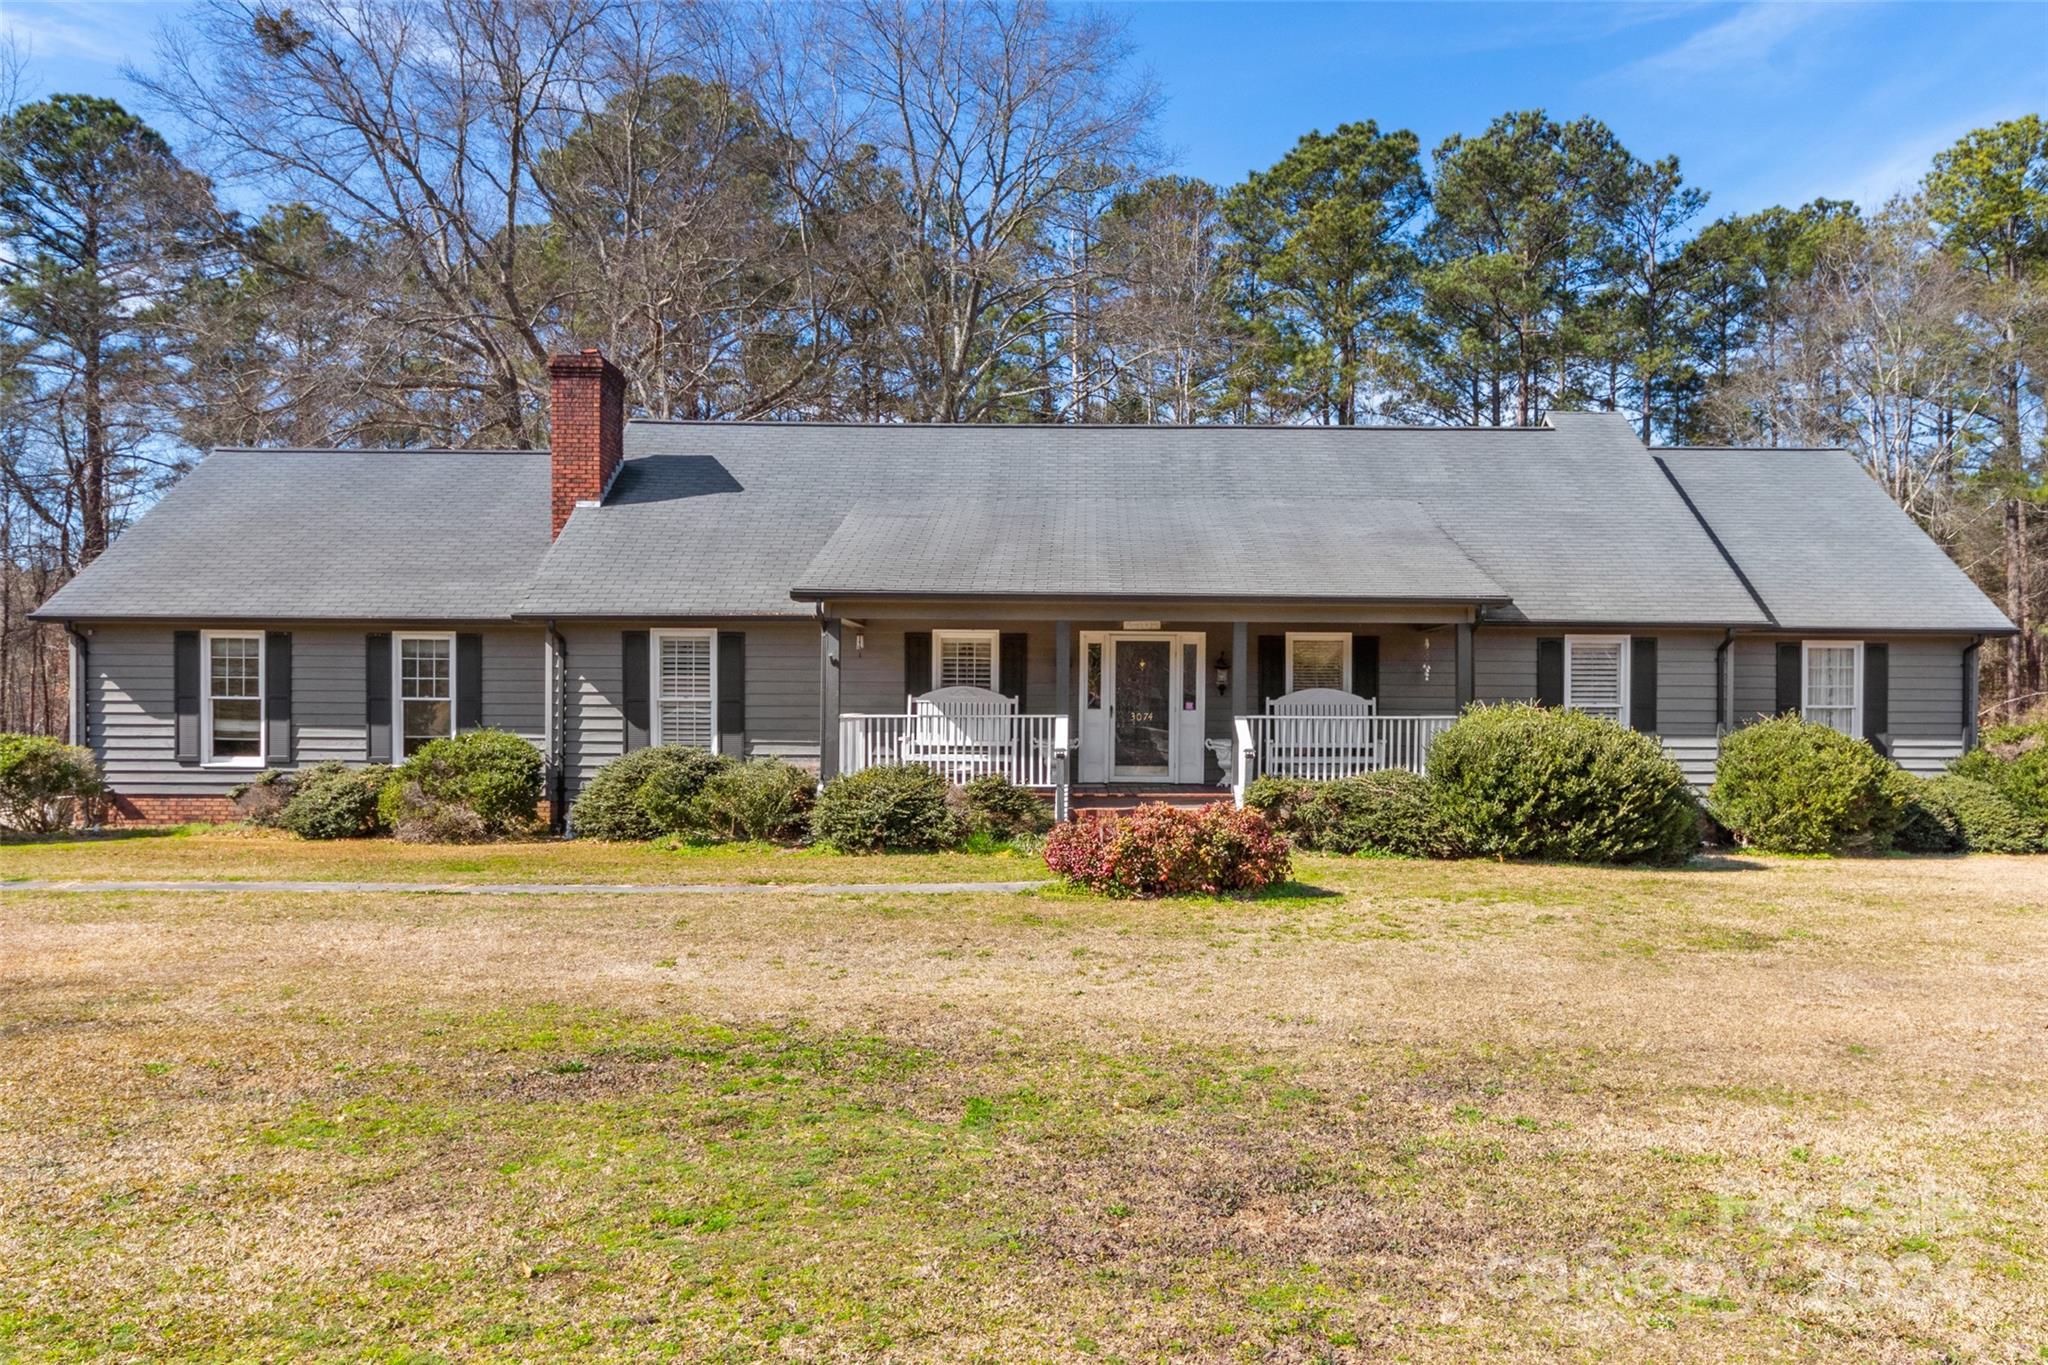 Photo one of 3074 Cane Mill Rd Lancaster SC 29720 | MLS 4110607